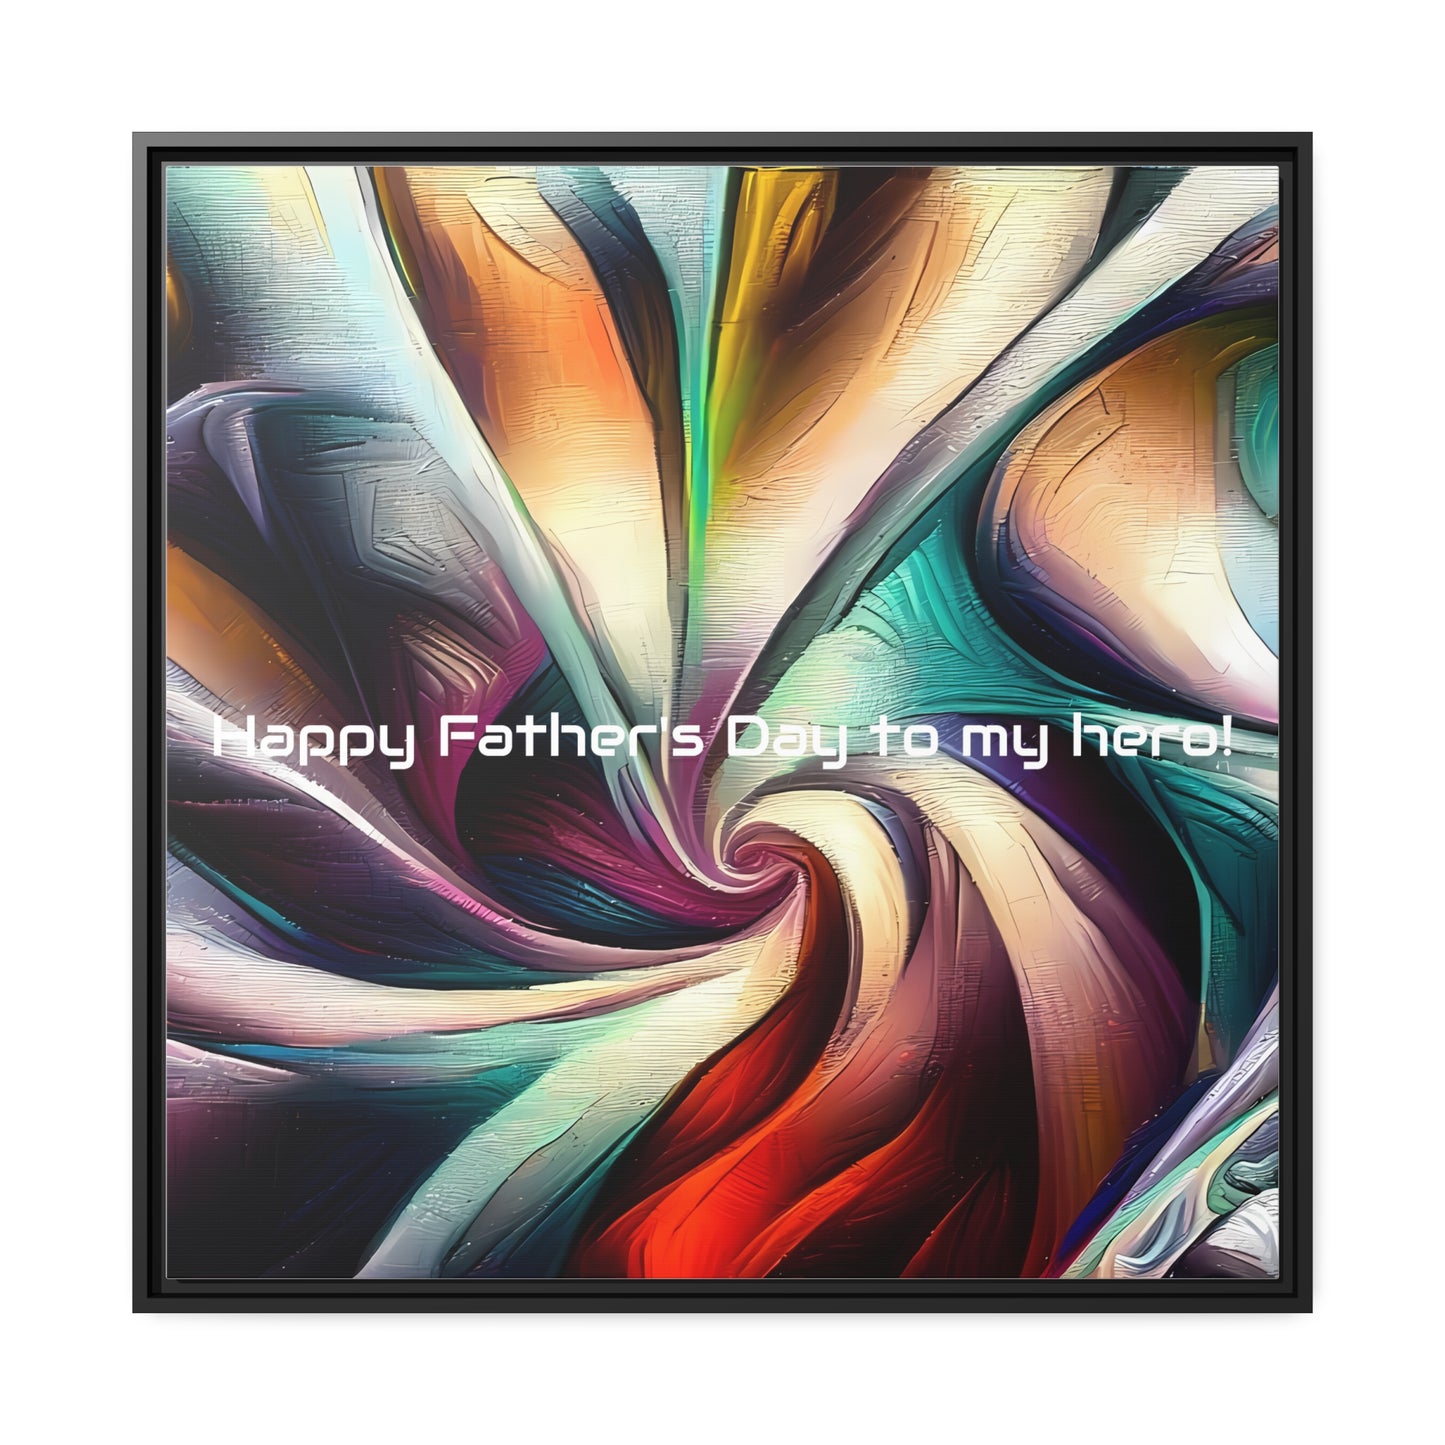 Awesome Matte Wall Art Canvas Decor Black Frame - Happy Father's Day to my hero! -  Canvas Art Fathers Day Gift Item